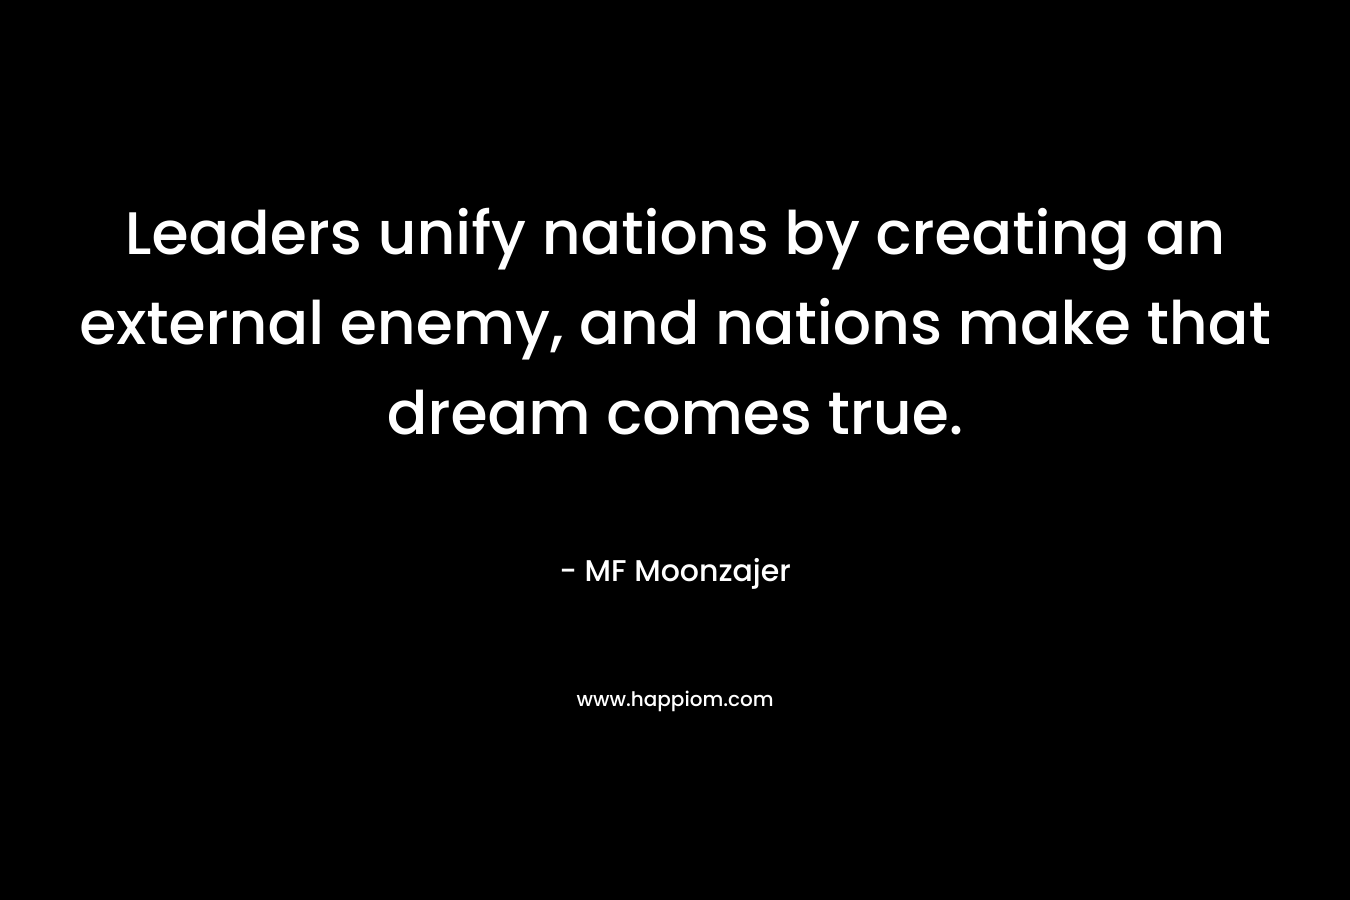 Leaders unify nations by creating an external enemy, and nations make that dream comes true. – MF Moonzajer